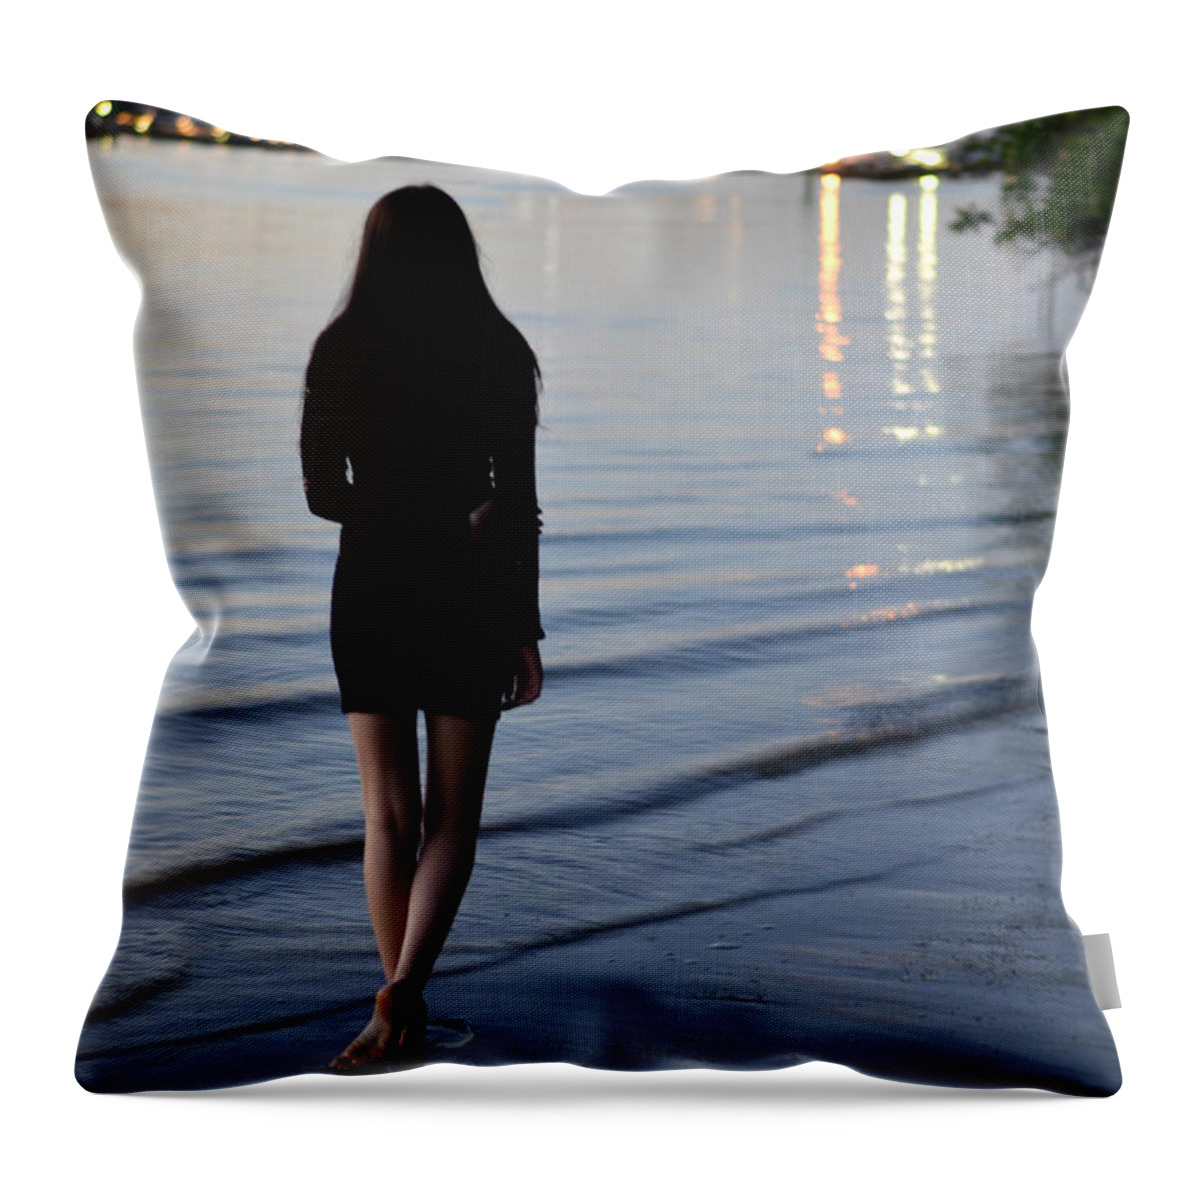 Woman Throw Pillow featuring the photograph No Man's Land by Laura Fasulo